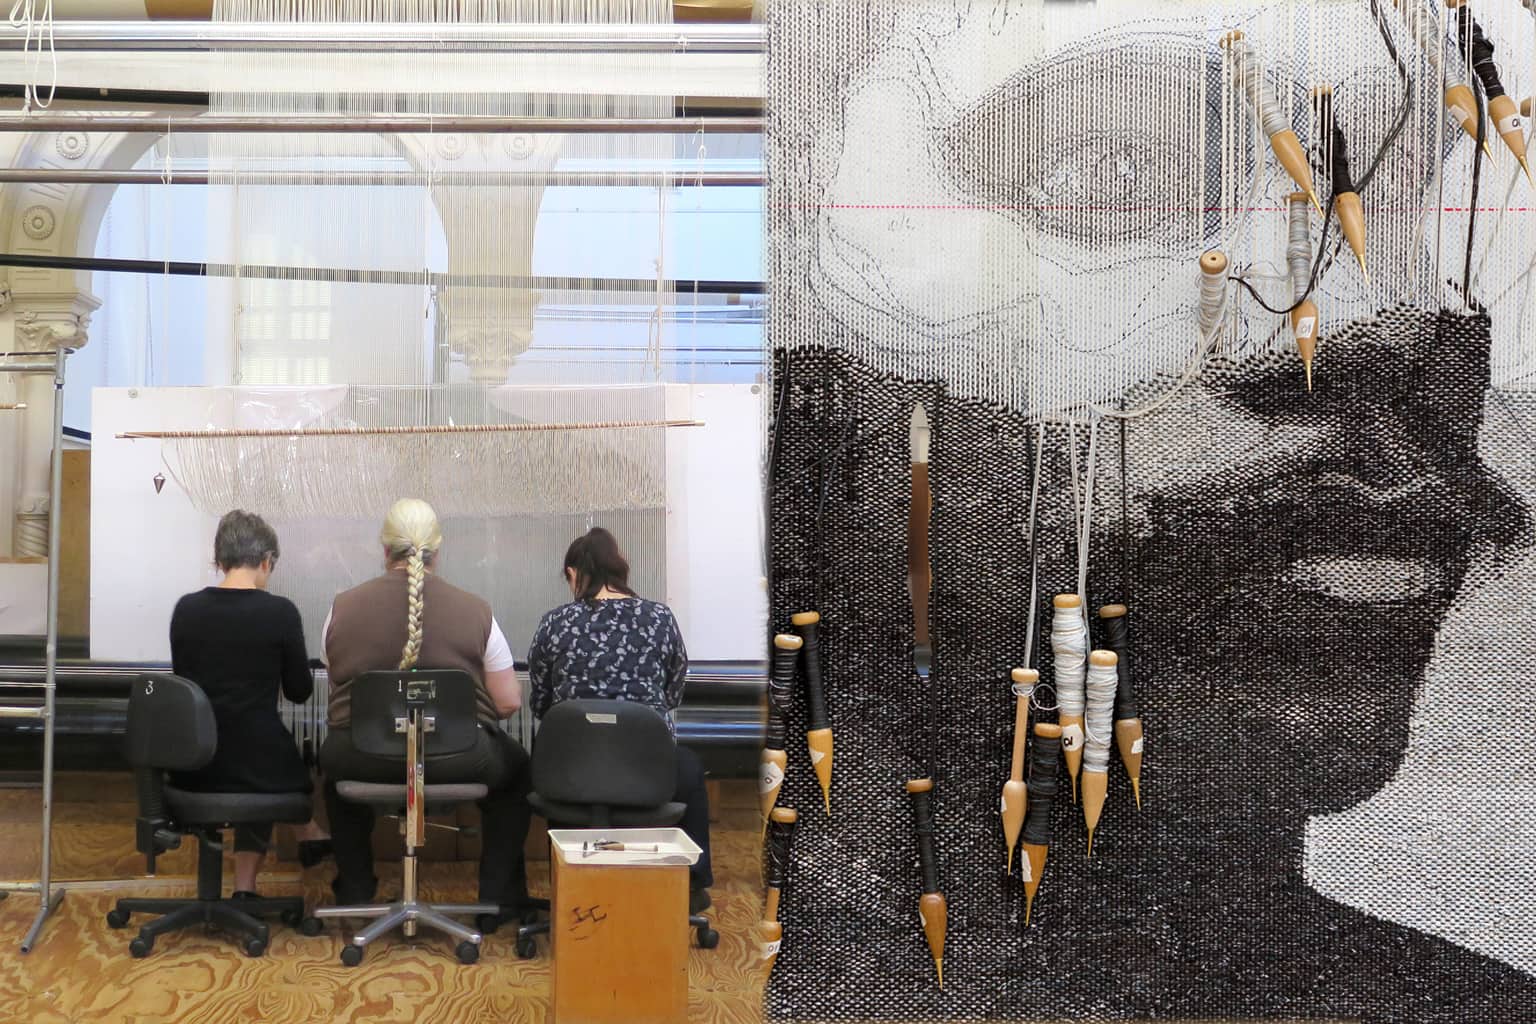 Left: ATW weavers working on 'Catching Breath' designed by Brook Andrew in 2014. Photograph: ATW. Right: Detail of 'Catching Breath' designed by Brook Andrew in 2014. Photograph: Jeremy Weihrauch.